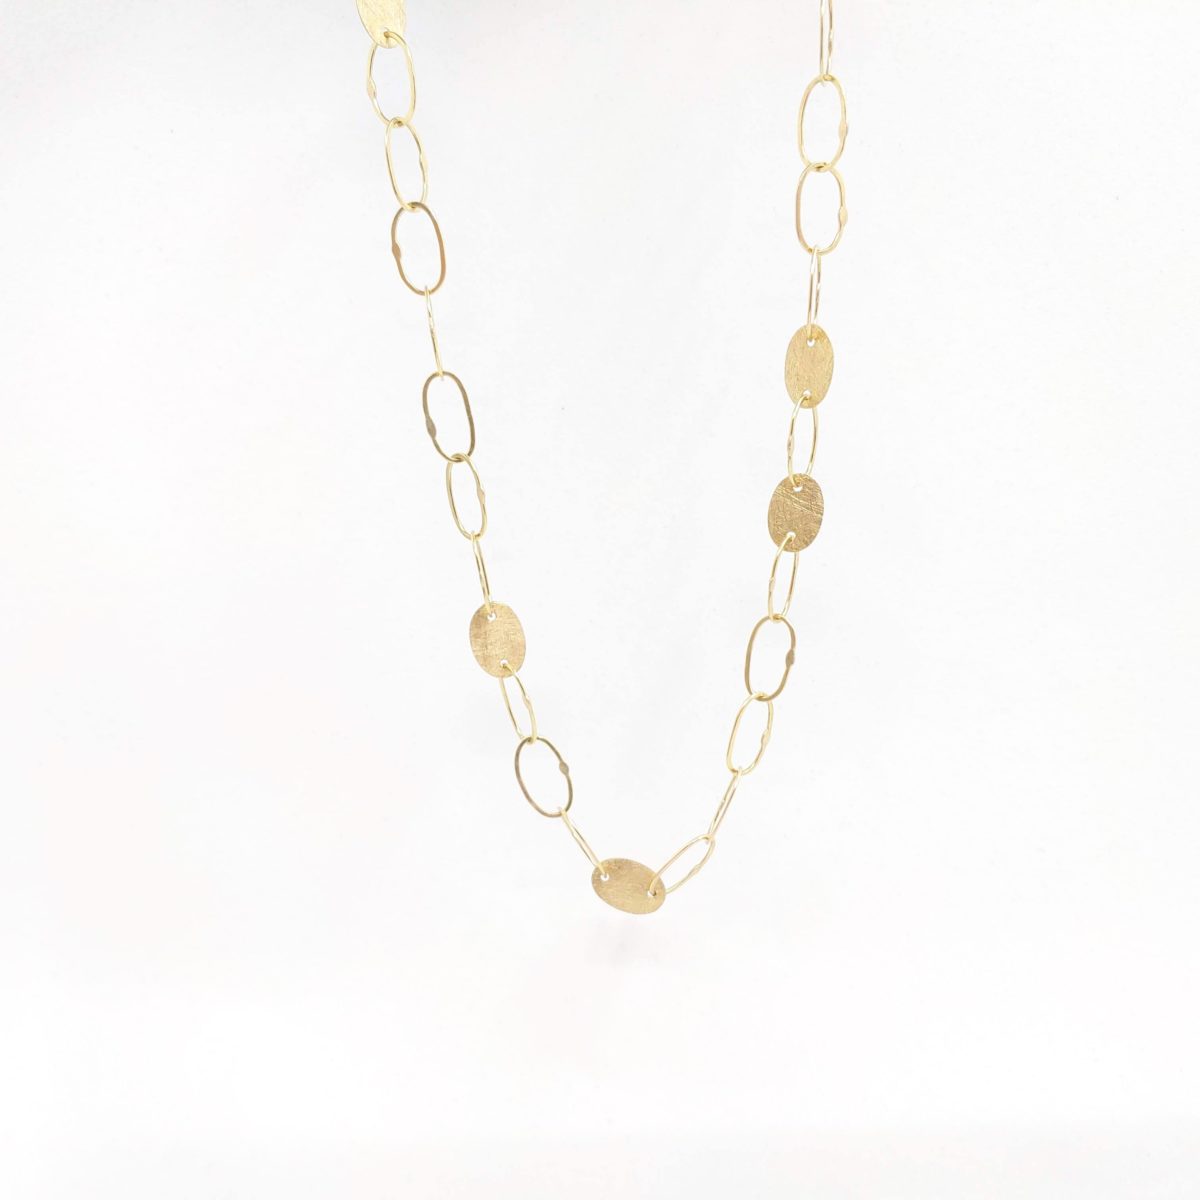 Oval Links with Elements Necklace